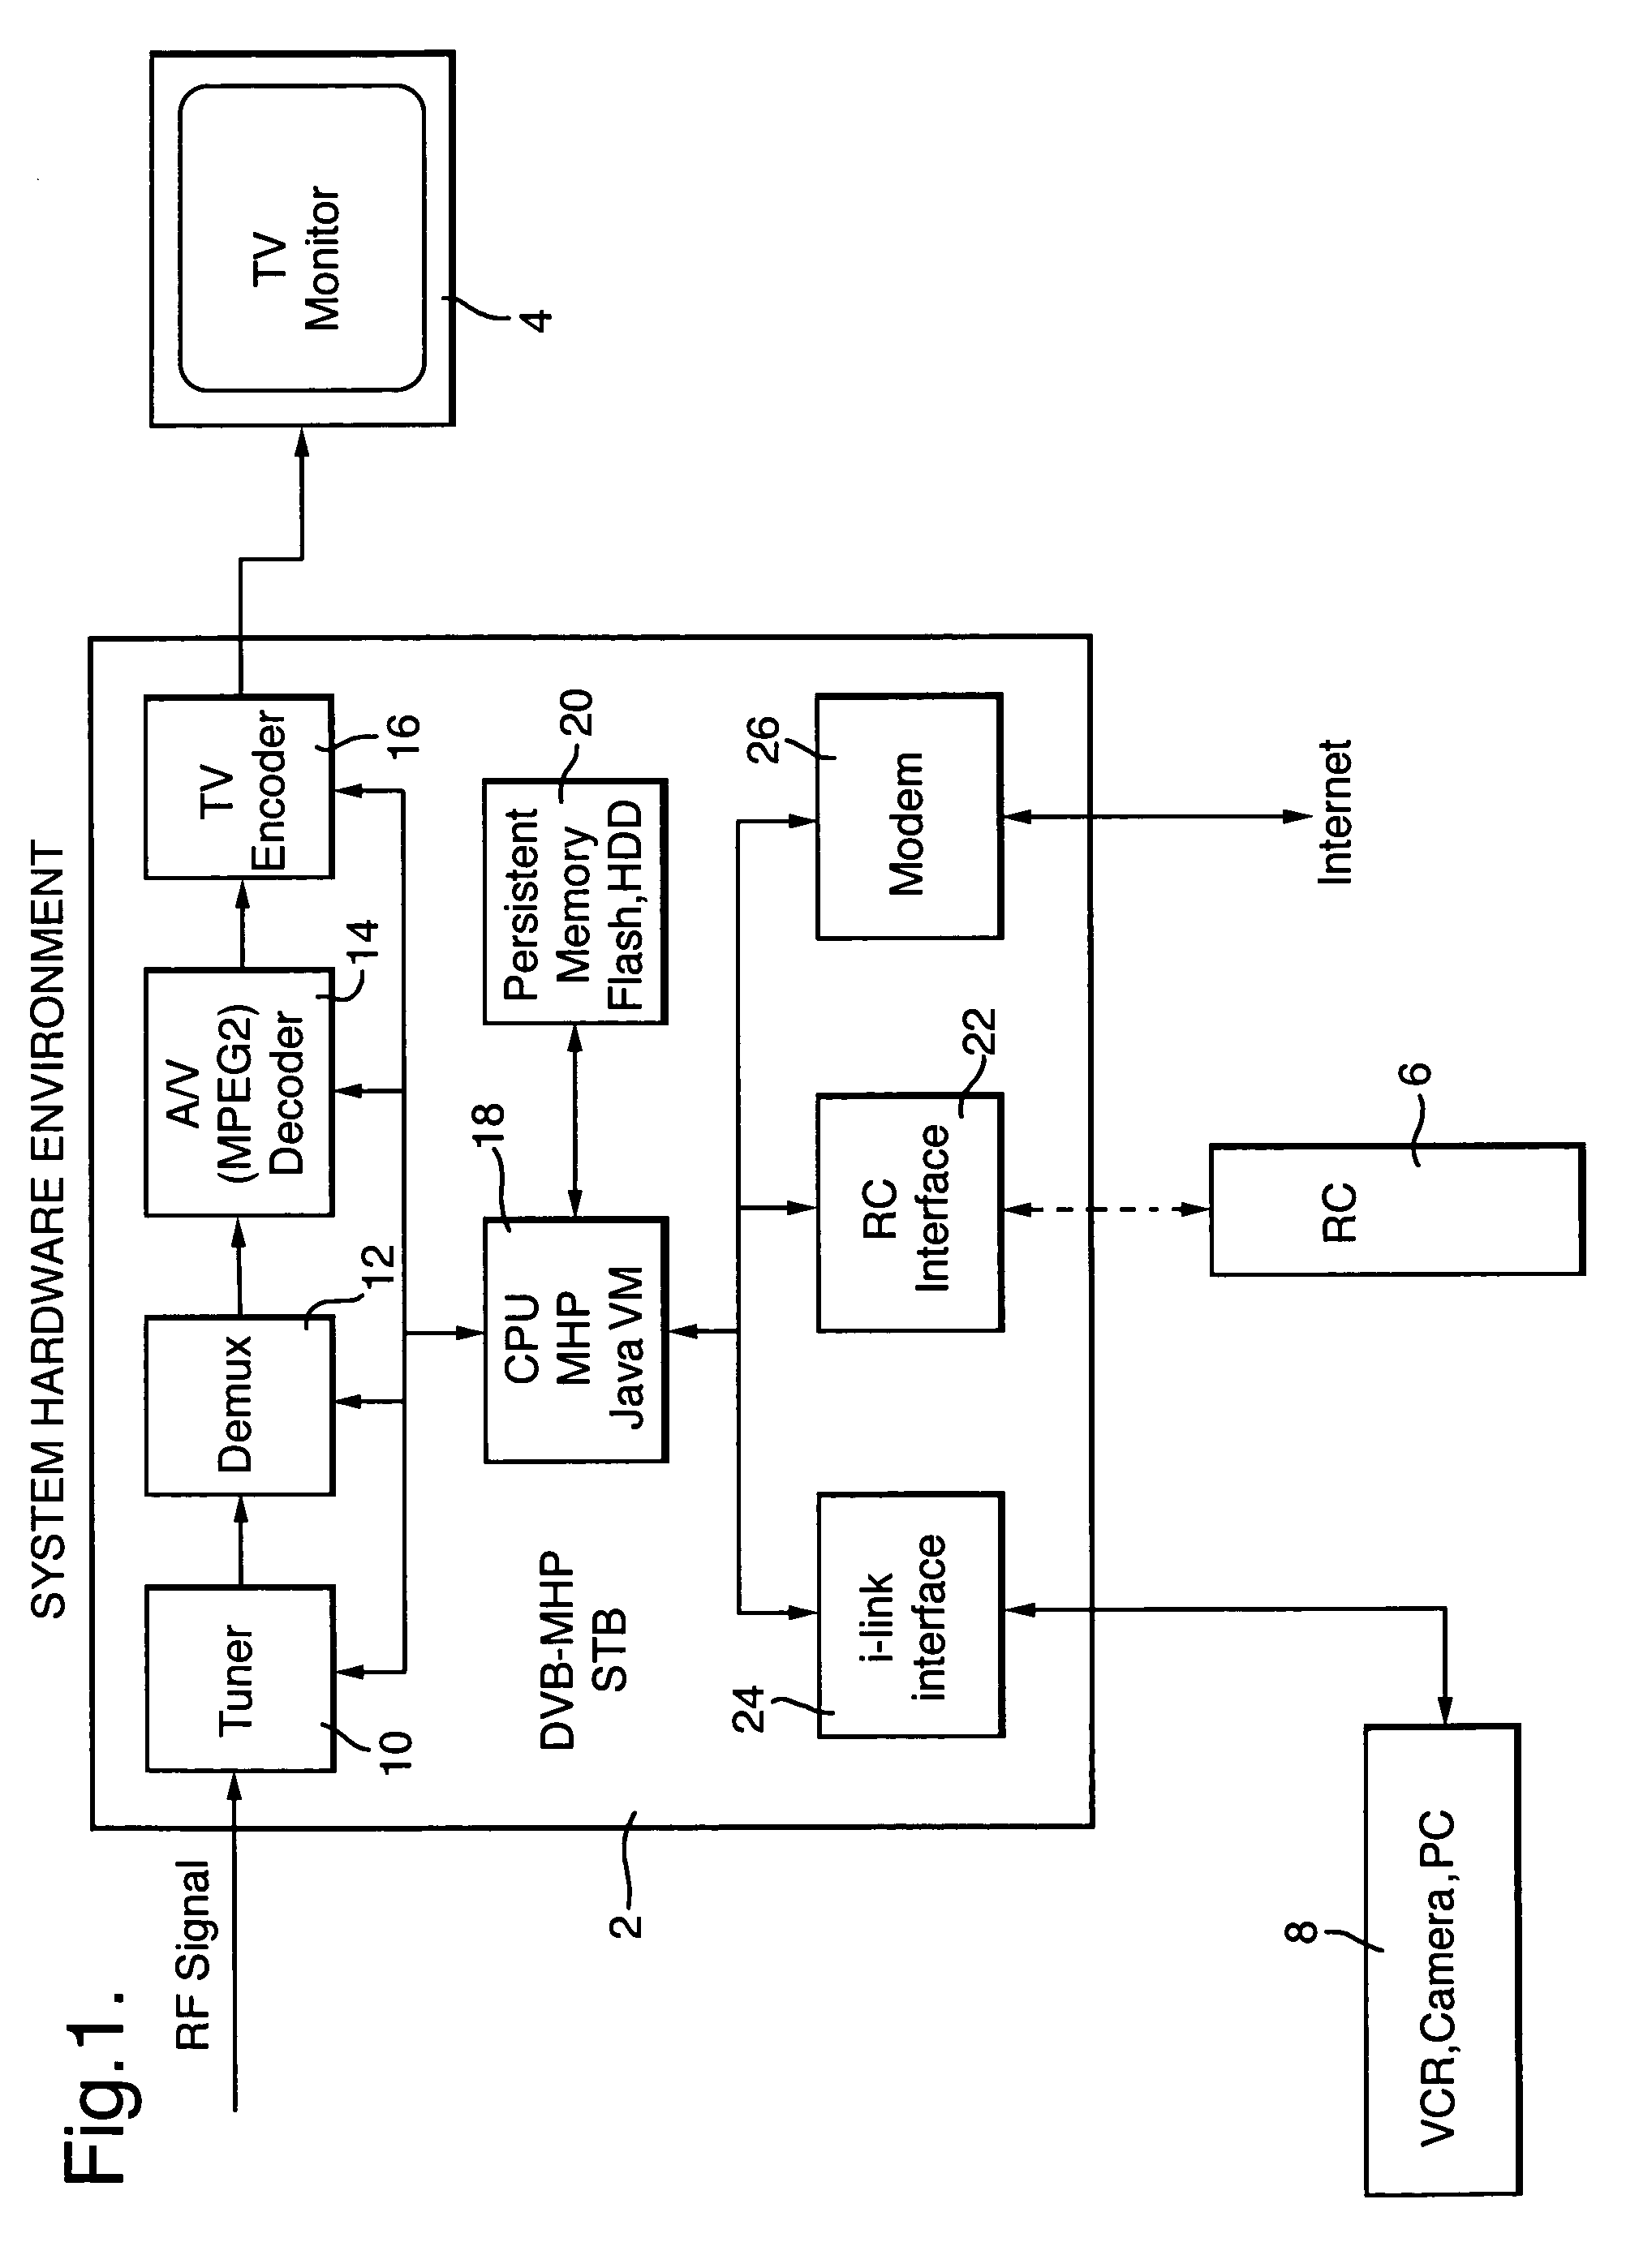 Television display device and method of operating a television system